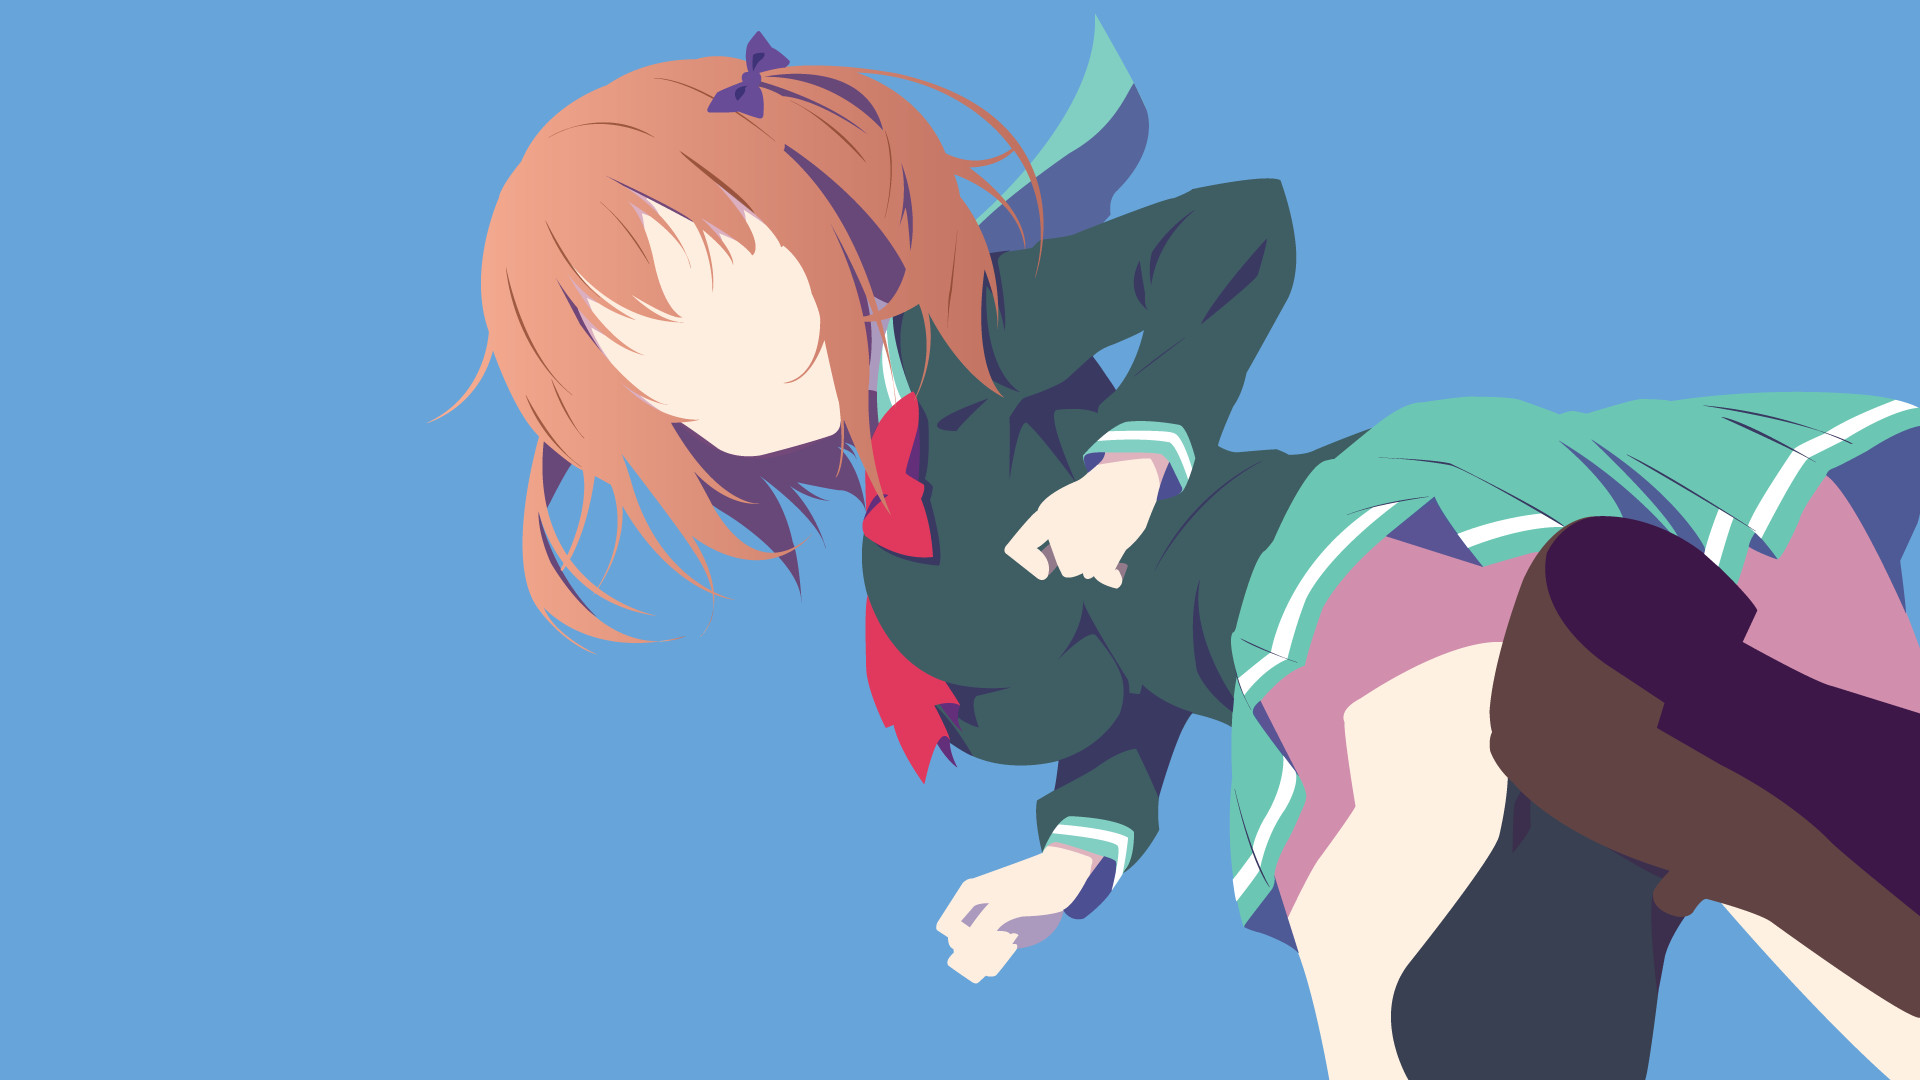 1920x1080 Anime - The Devil Is a Part-Timer! Chiho Sasaki Wallpaper